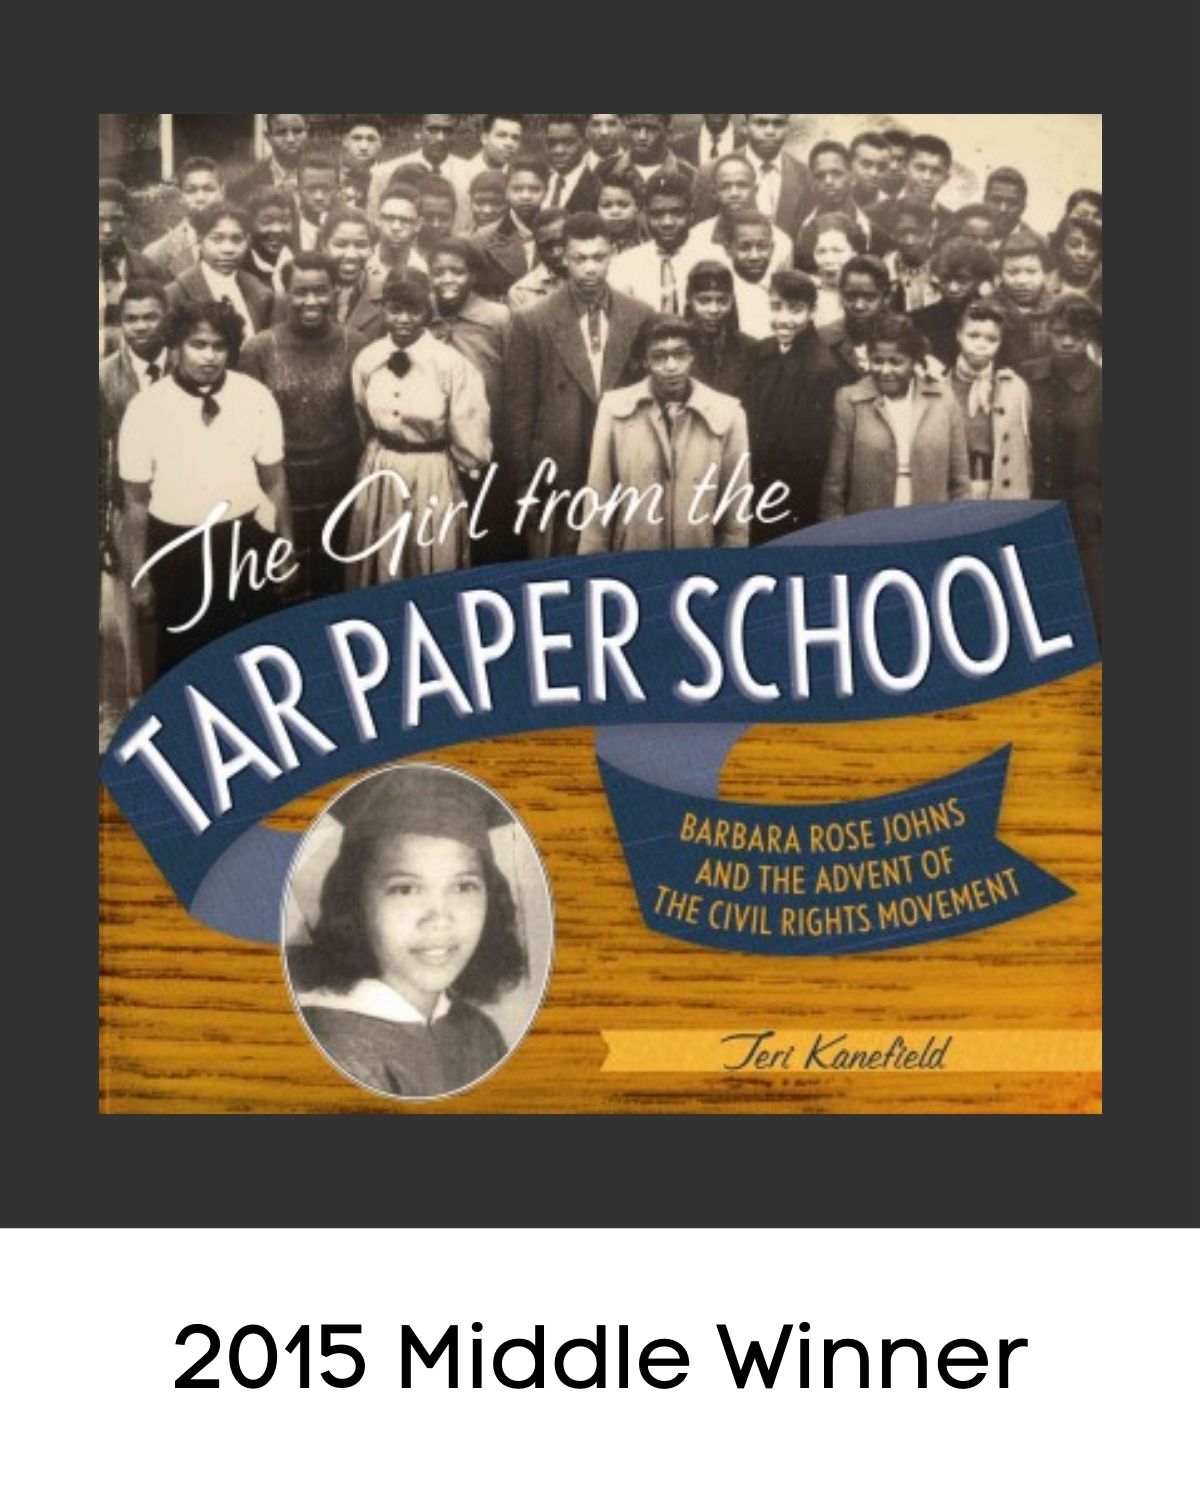 The Girl from the Tar Paper School: Barbara Rose Johns and the Advent of the Civil Rights Movement book cover